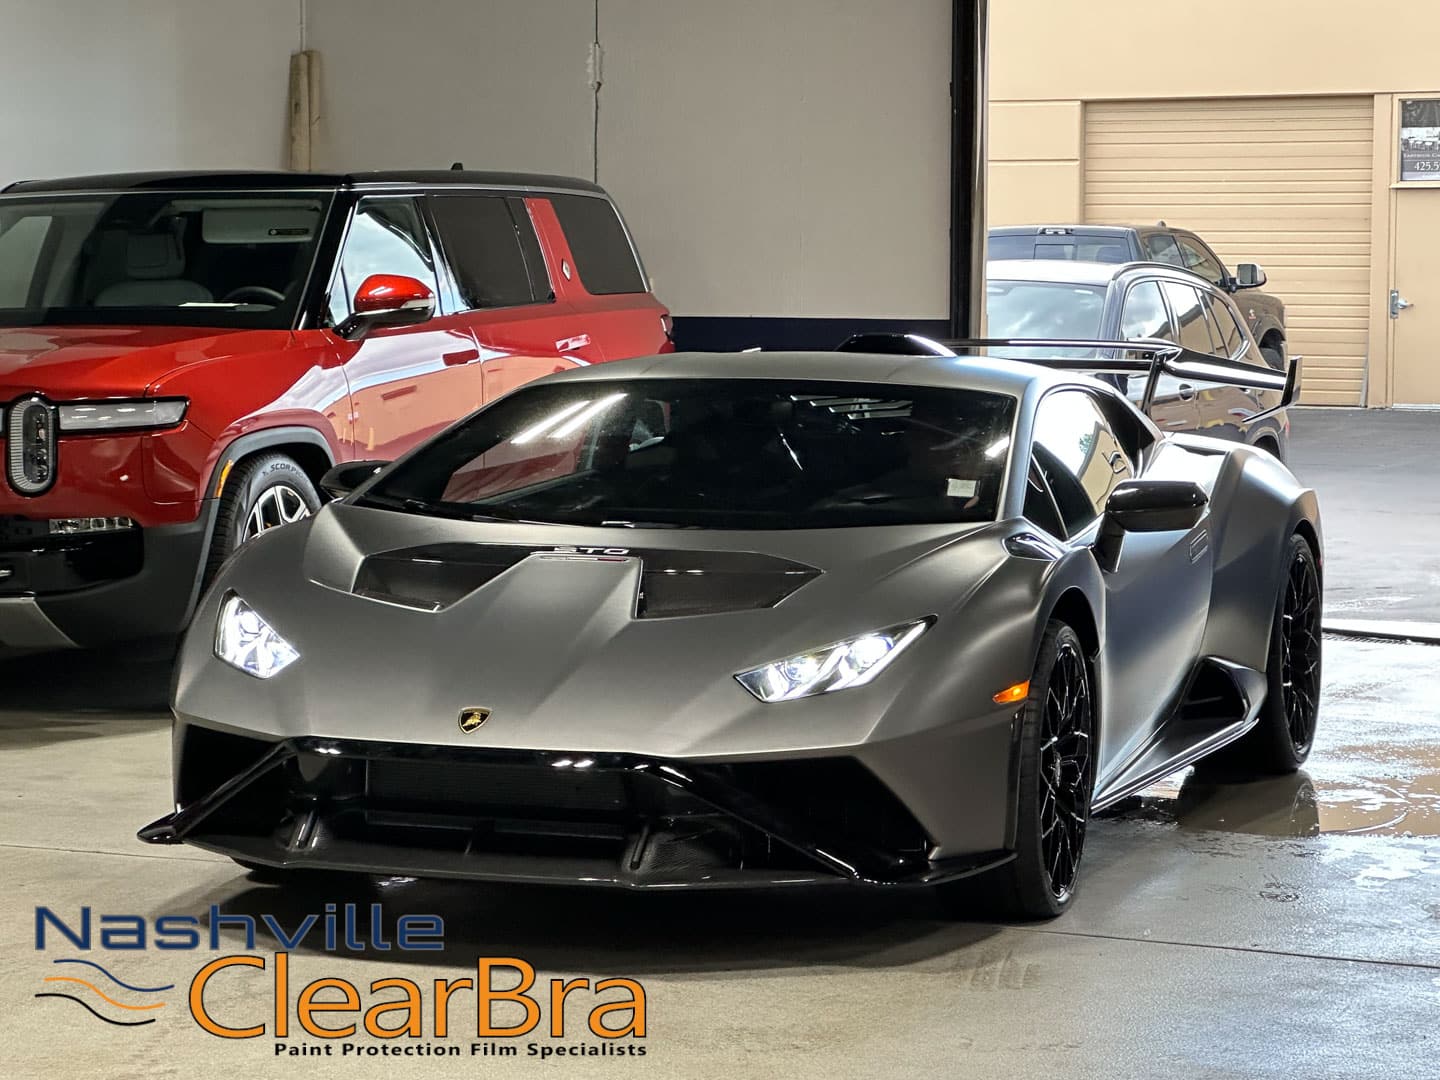 https://nashvilleclearbra.com/wp-content/uploads/2023/10/nashville-clearbra-xpel-ultimate-fusion-prime-clear-bra-ceramic-tint-ppf-paint-protection-film-brentwood-tennessee-108.jpg